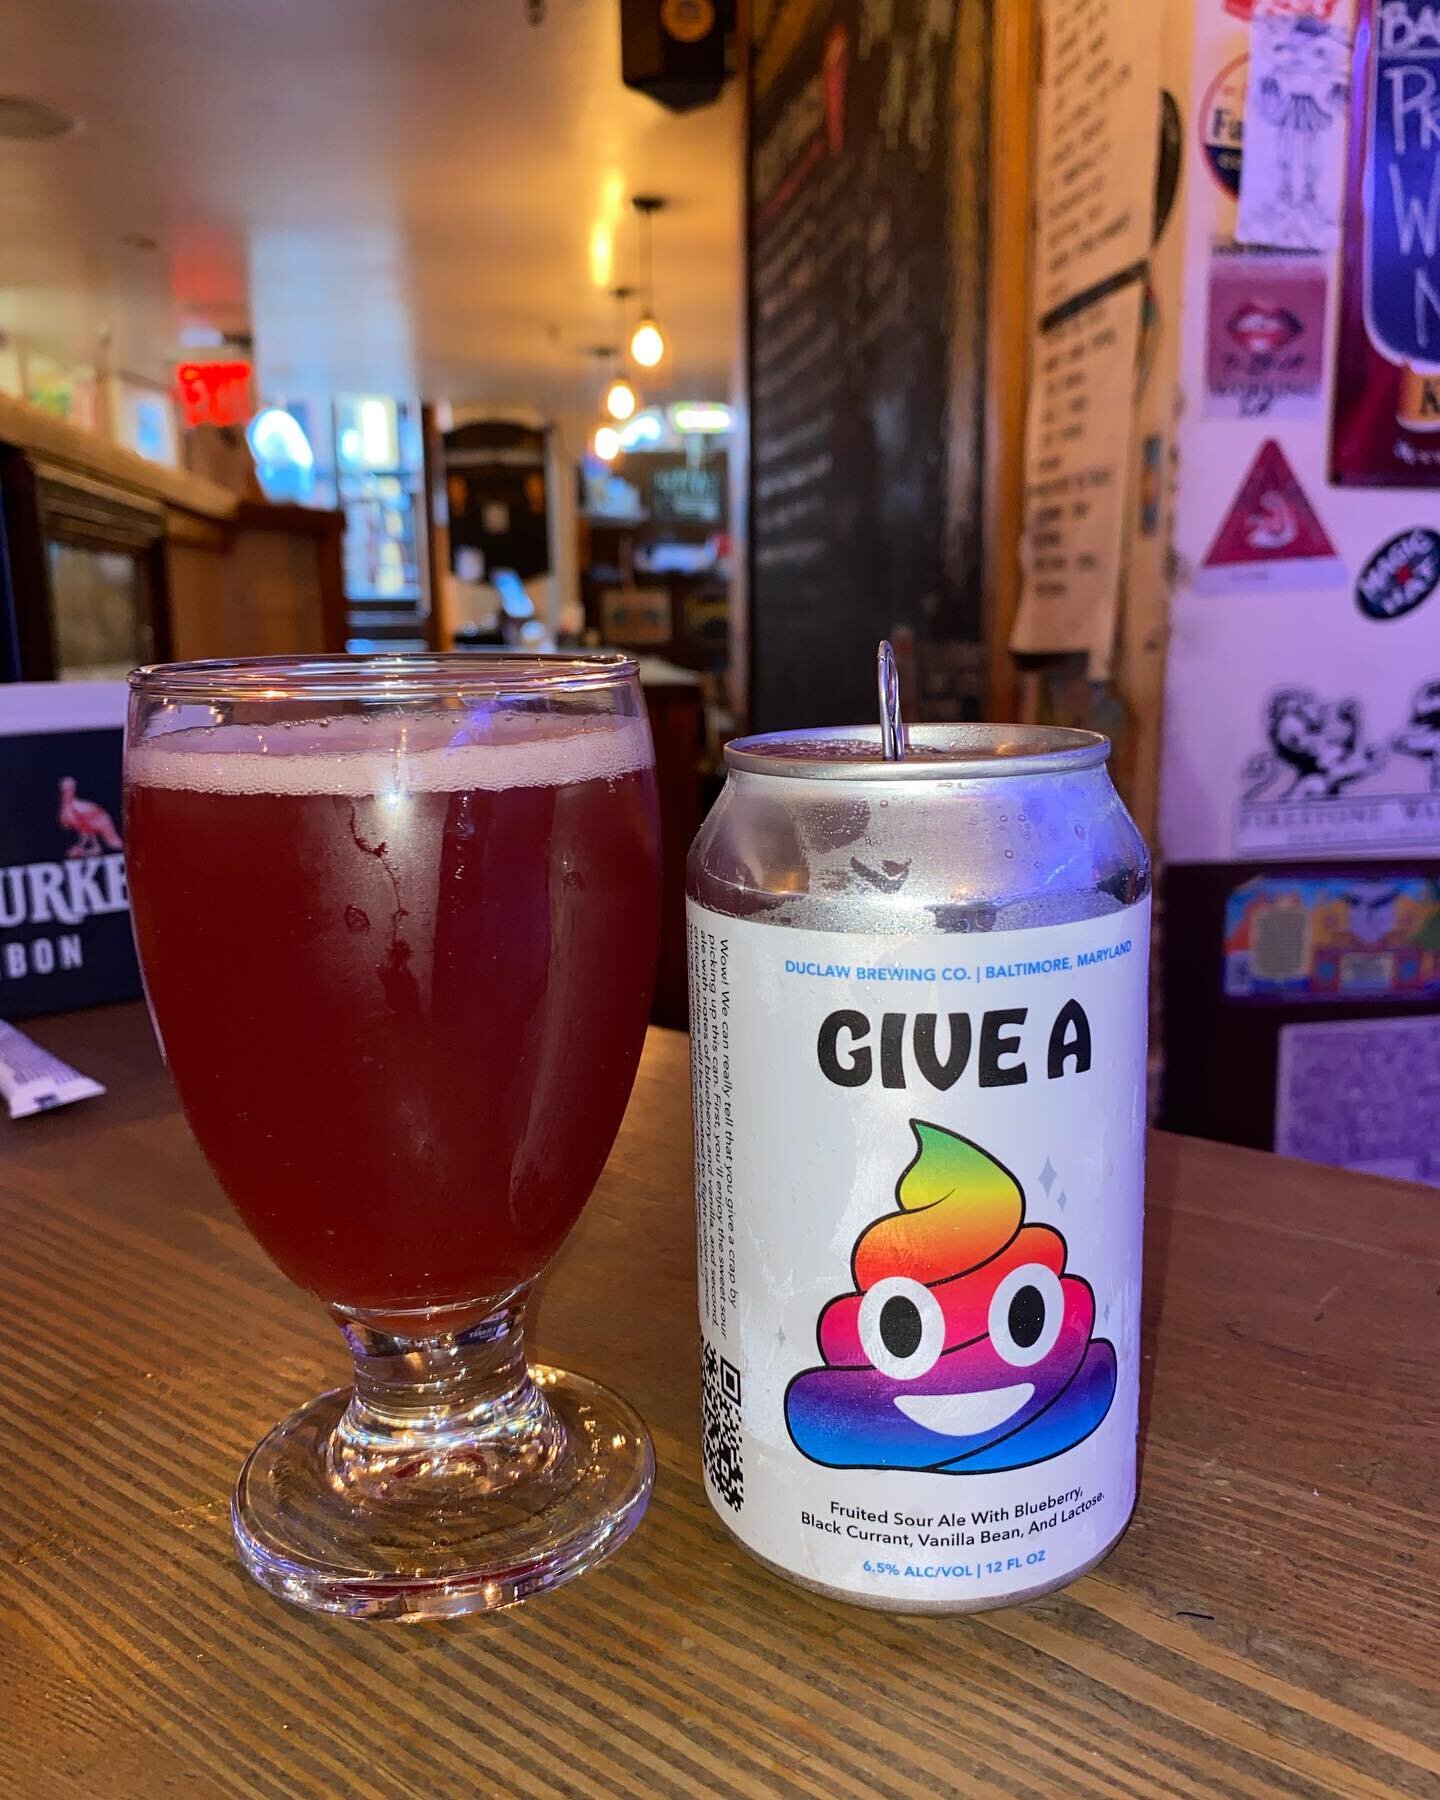 Can of the day! @duclawbrewingco &lsquo;s &ldquo;Give A 💩&rdquo;! This sour is jam packed with Blueberry, Black Currant, Vanilla Bean and Lactose! Poured into a glass you&rsquo;re going to get a deep red color with a pink head! The smell is sweet wi